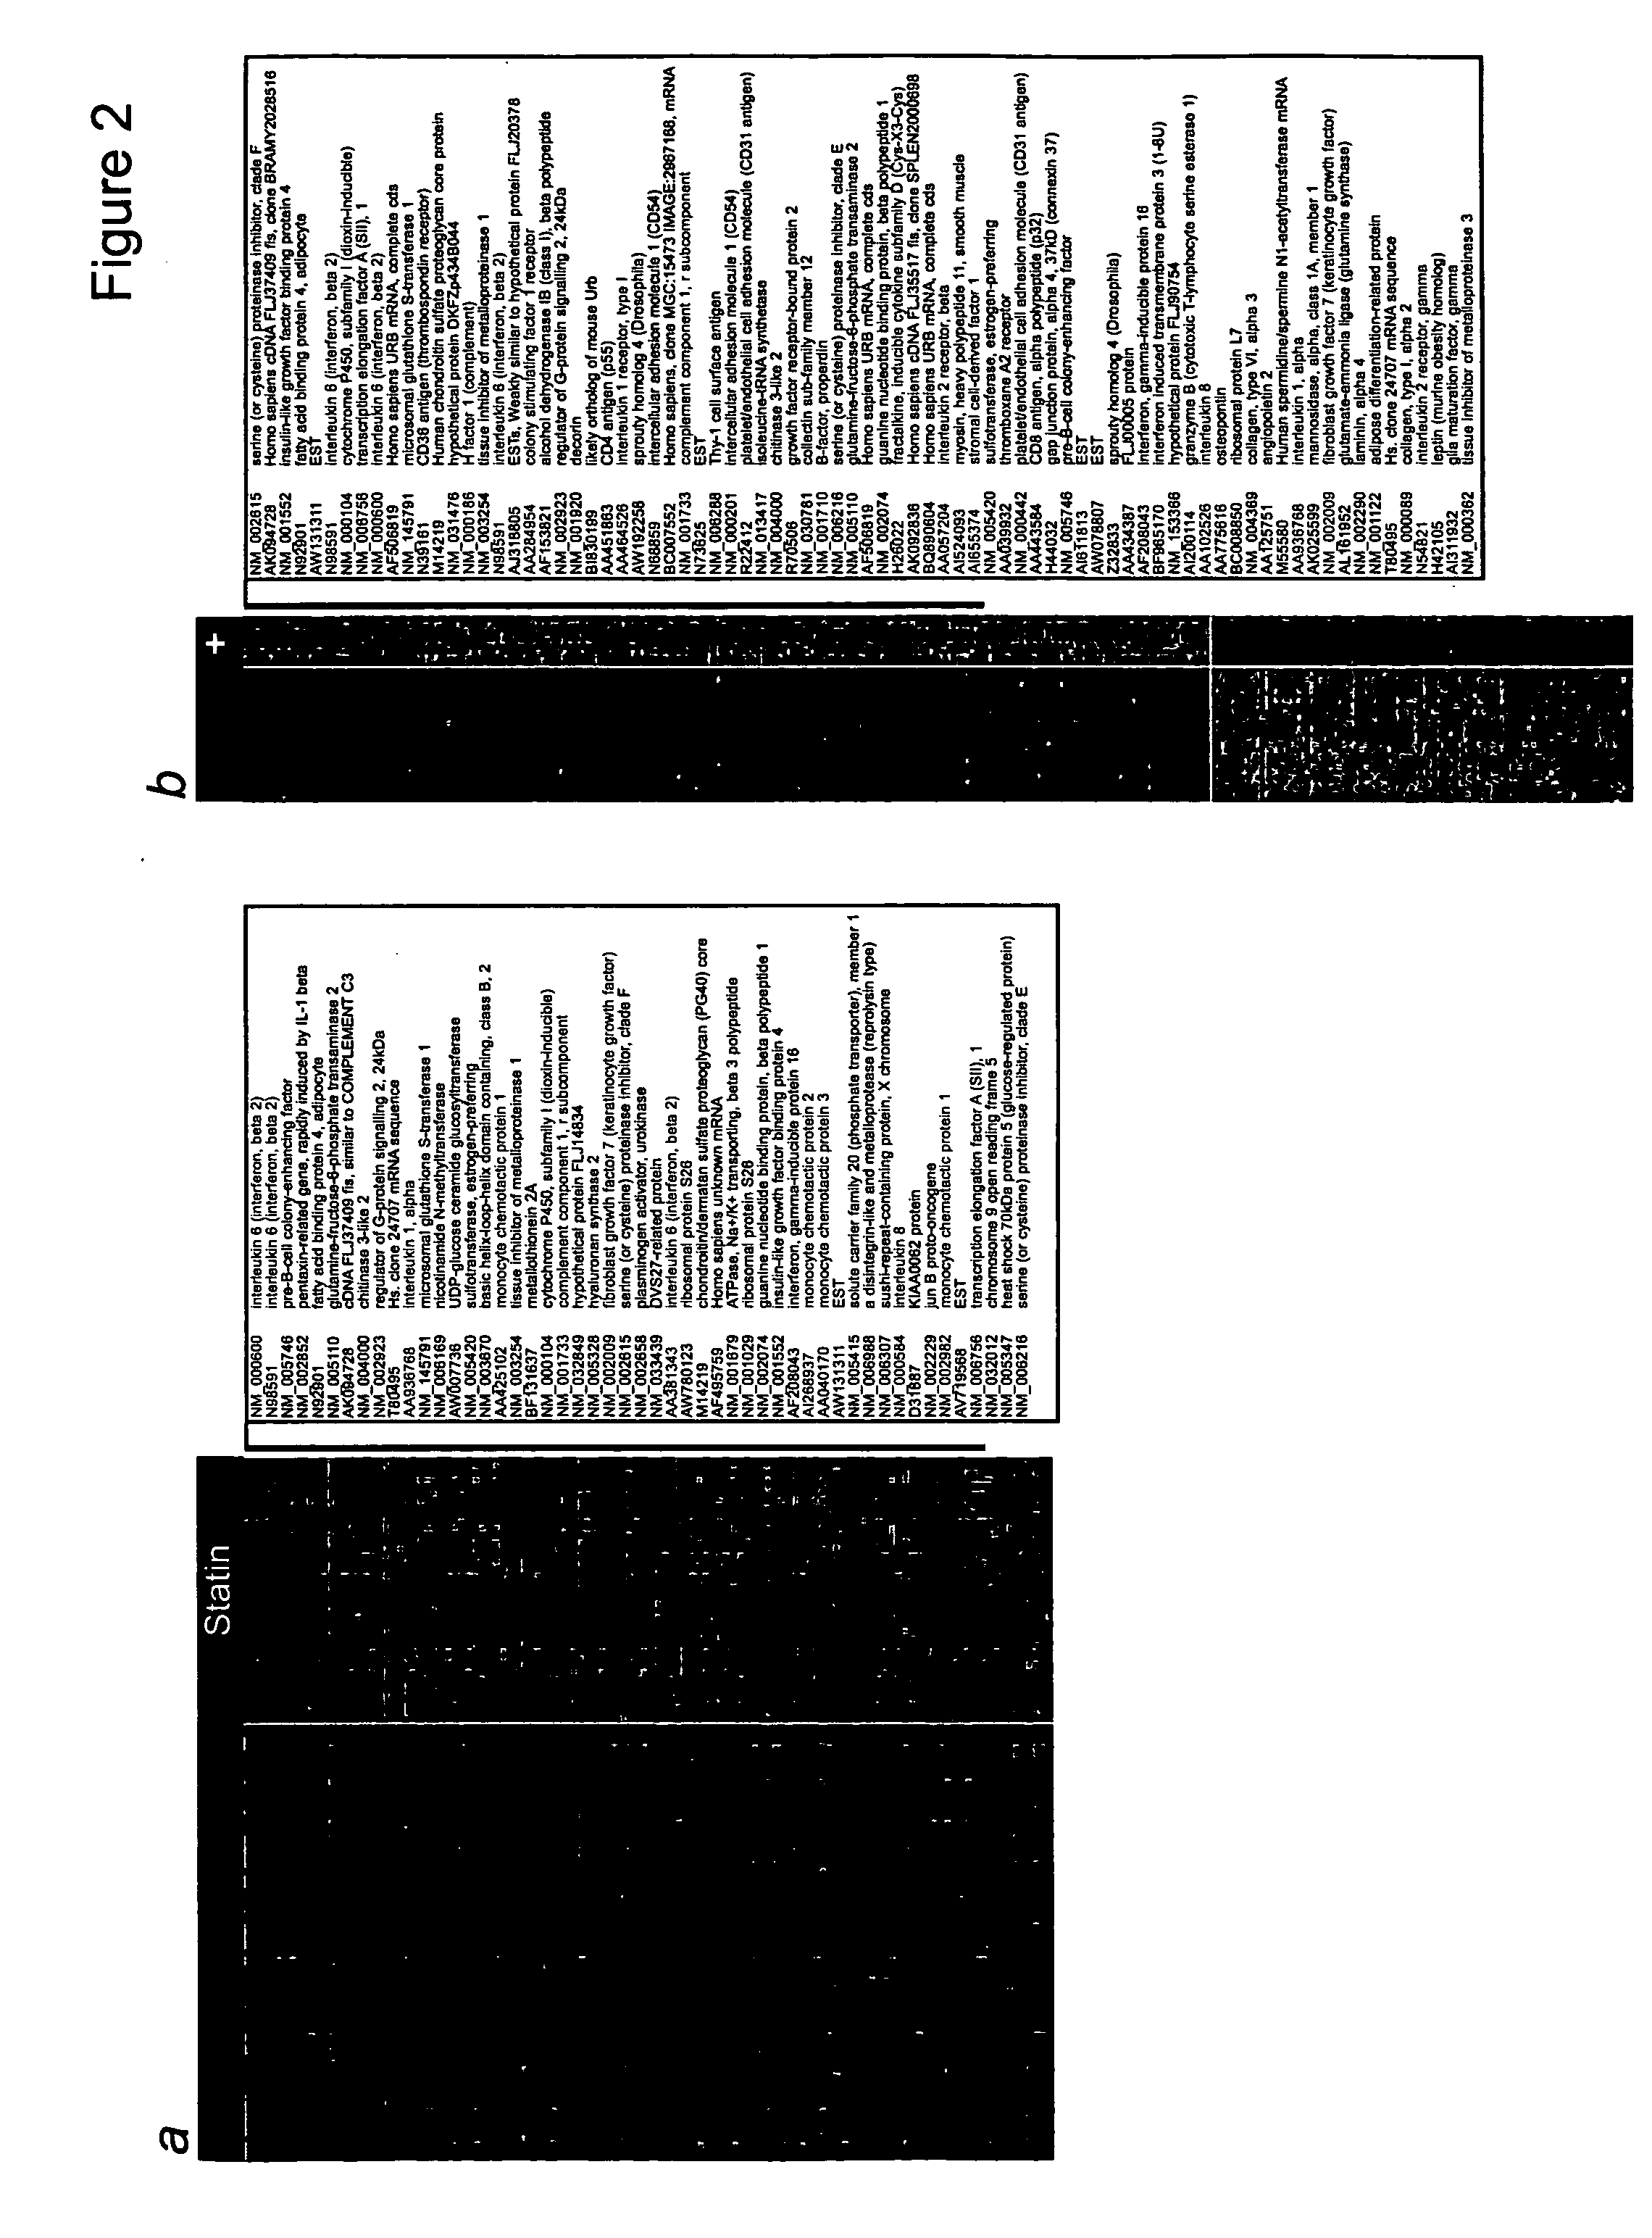 Atherosclerosis genes and related reagents and methods of use thereof